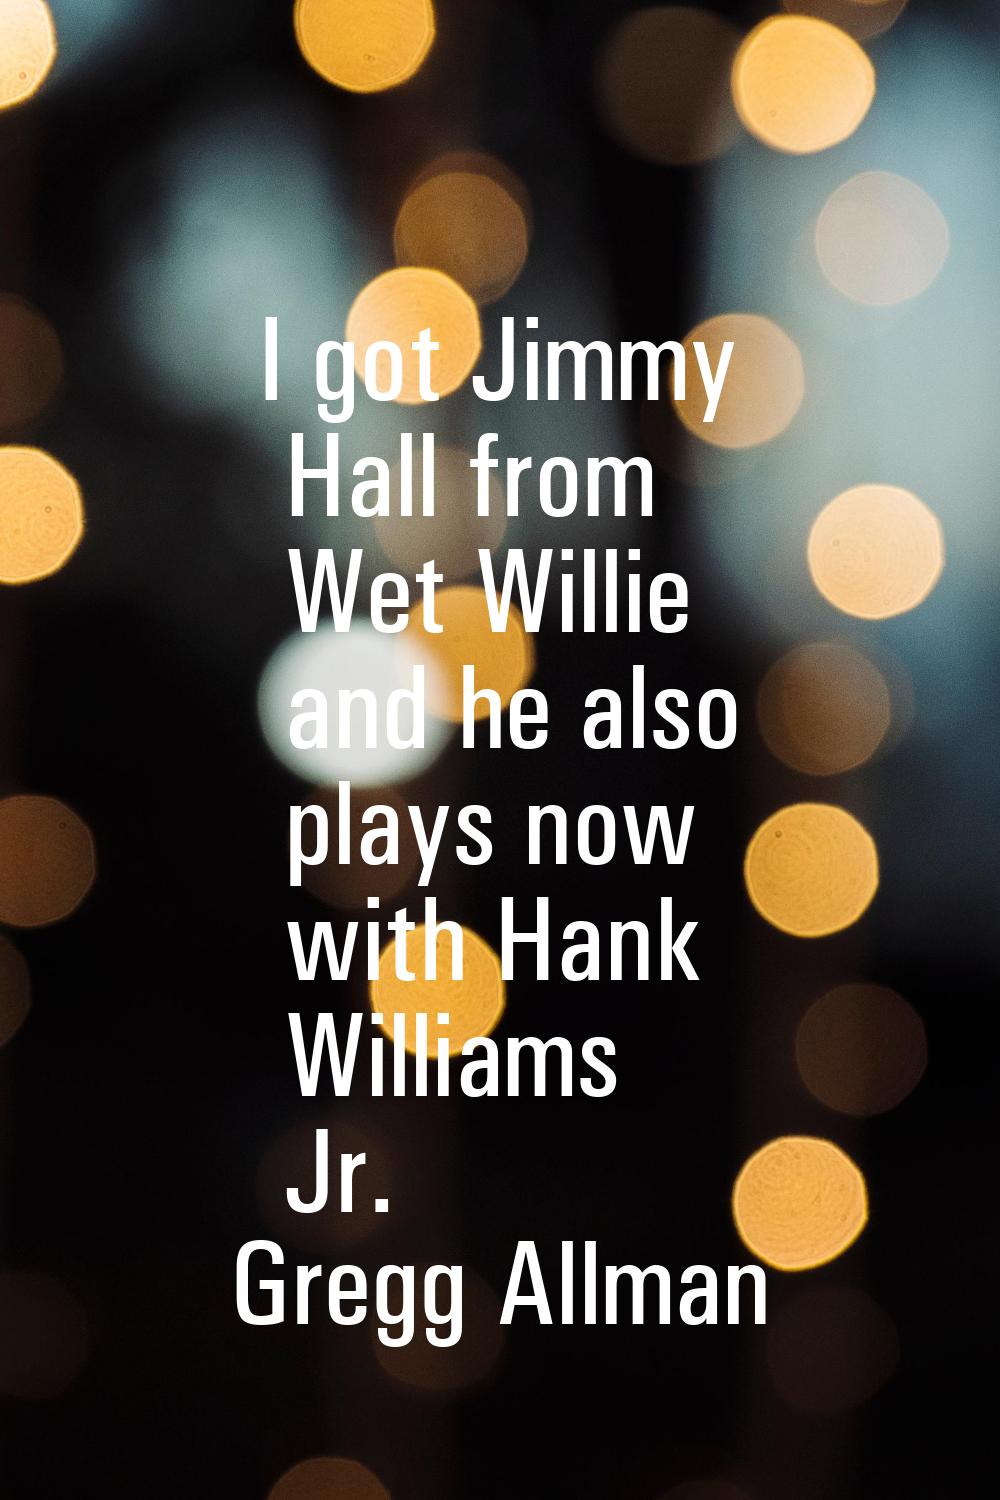 I got Jimmy Hall from Wet Willie and he also plays now with Hank Williams Jr.